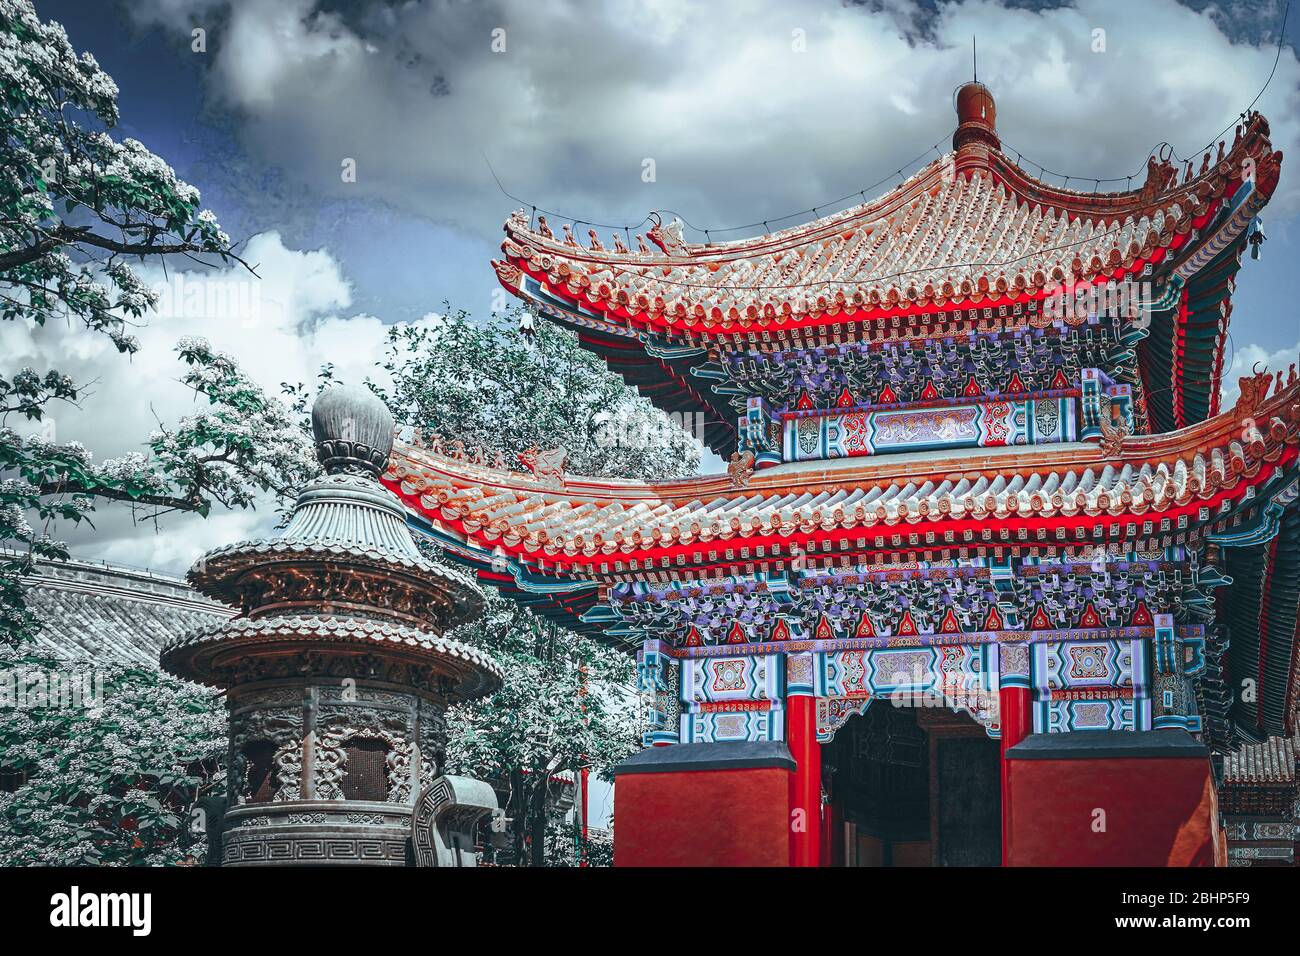 Beautiful View of Yonghegong Lama Temple.Beijing. Lama Temple is one of the largest and most important Tibetan Buddhist monasteries in the world. Stock Photo